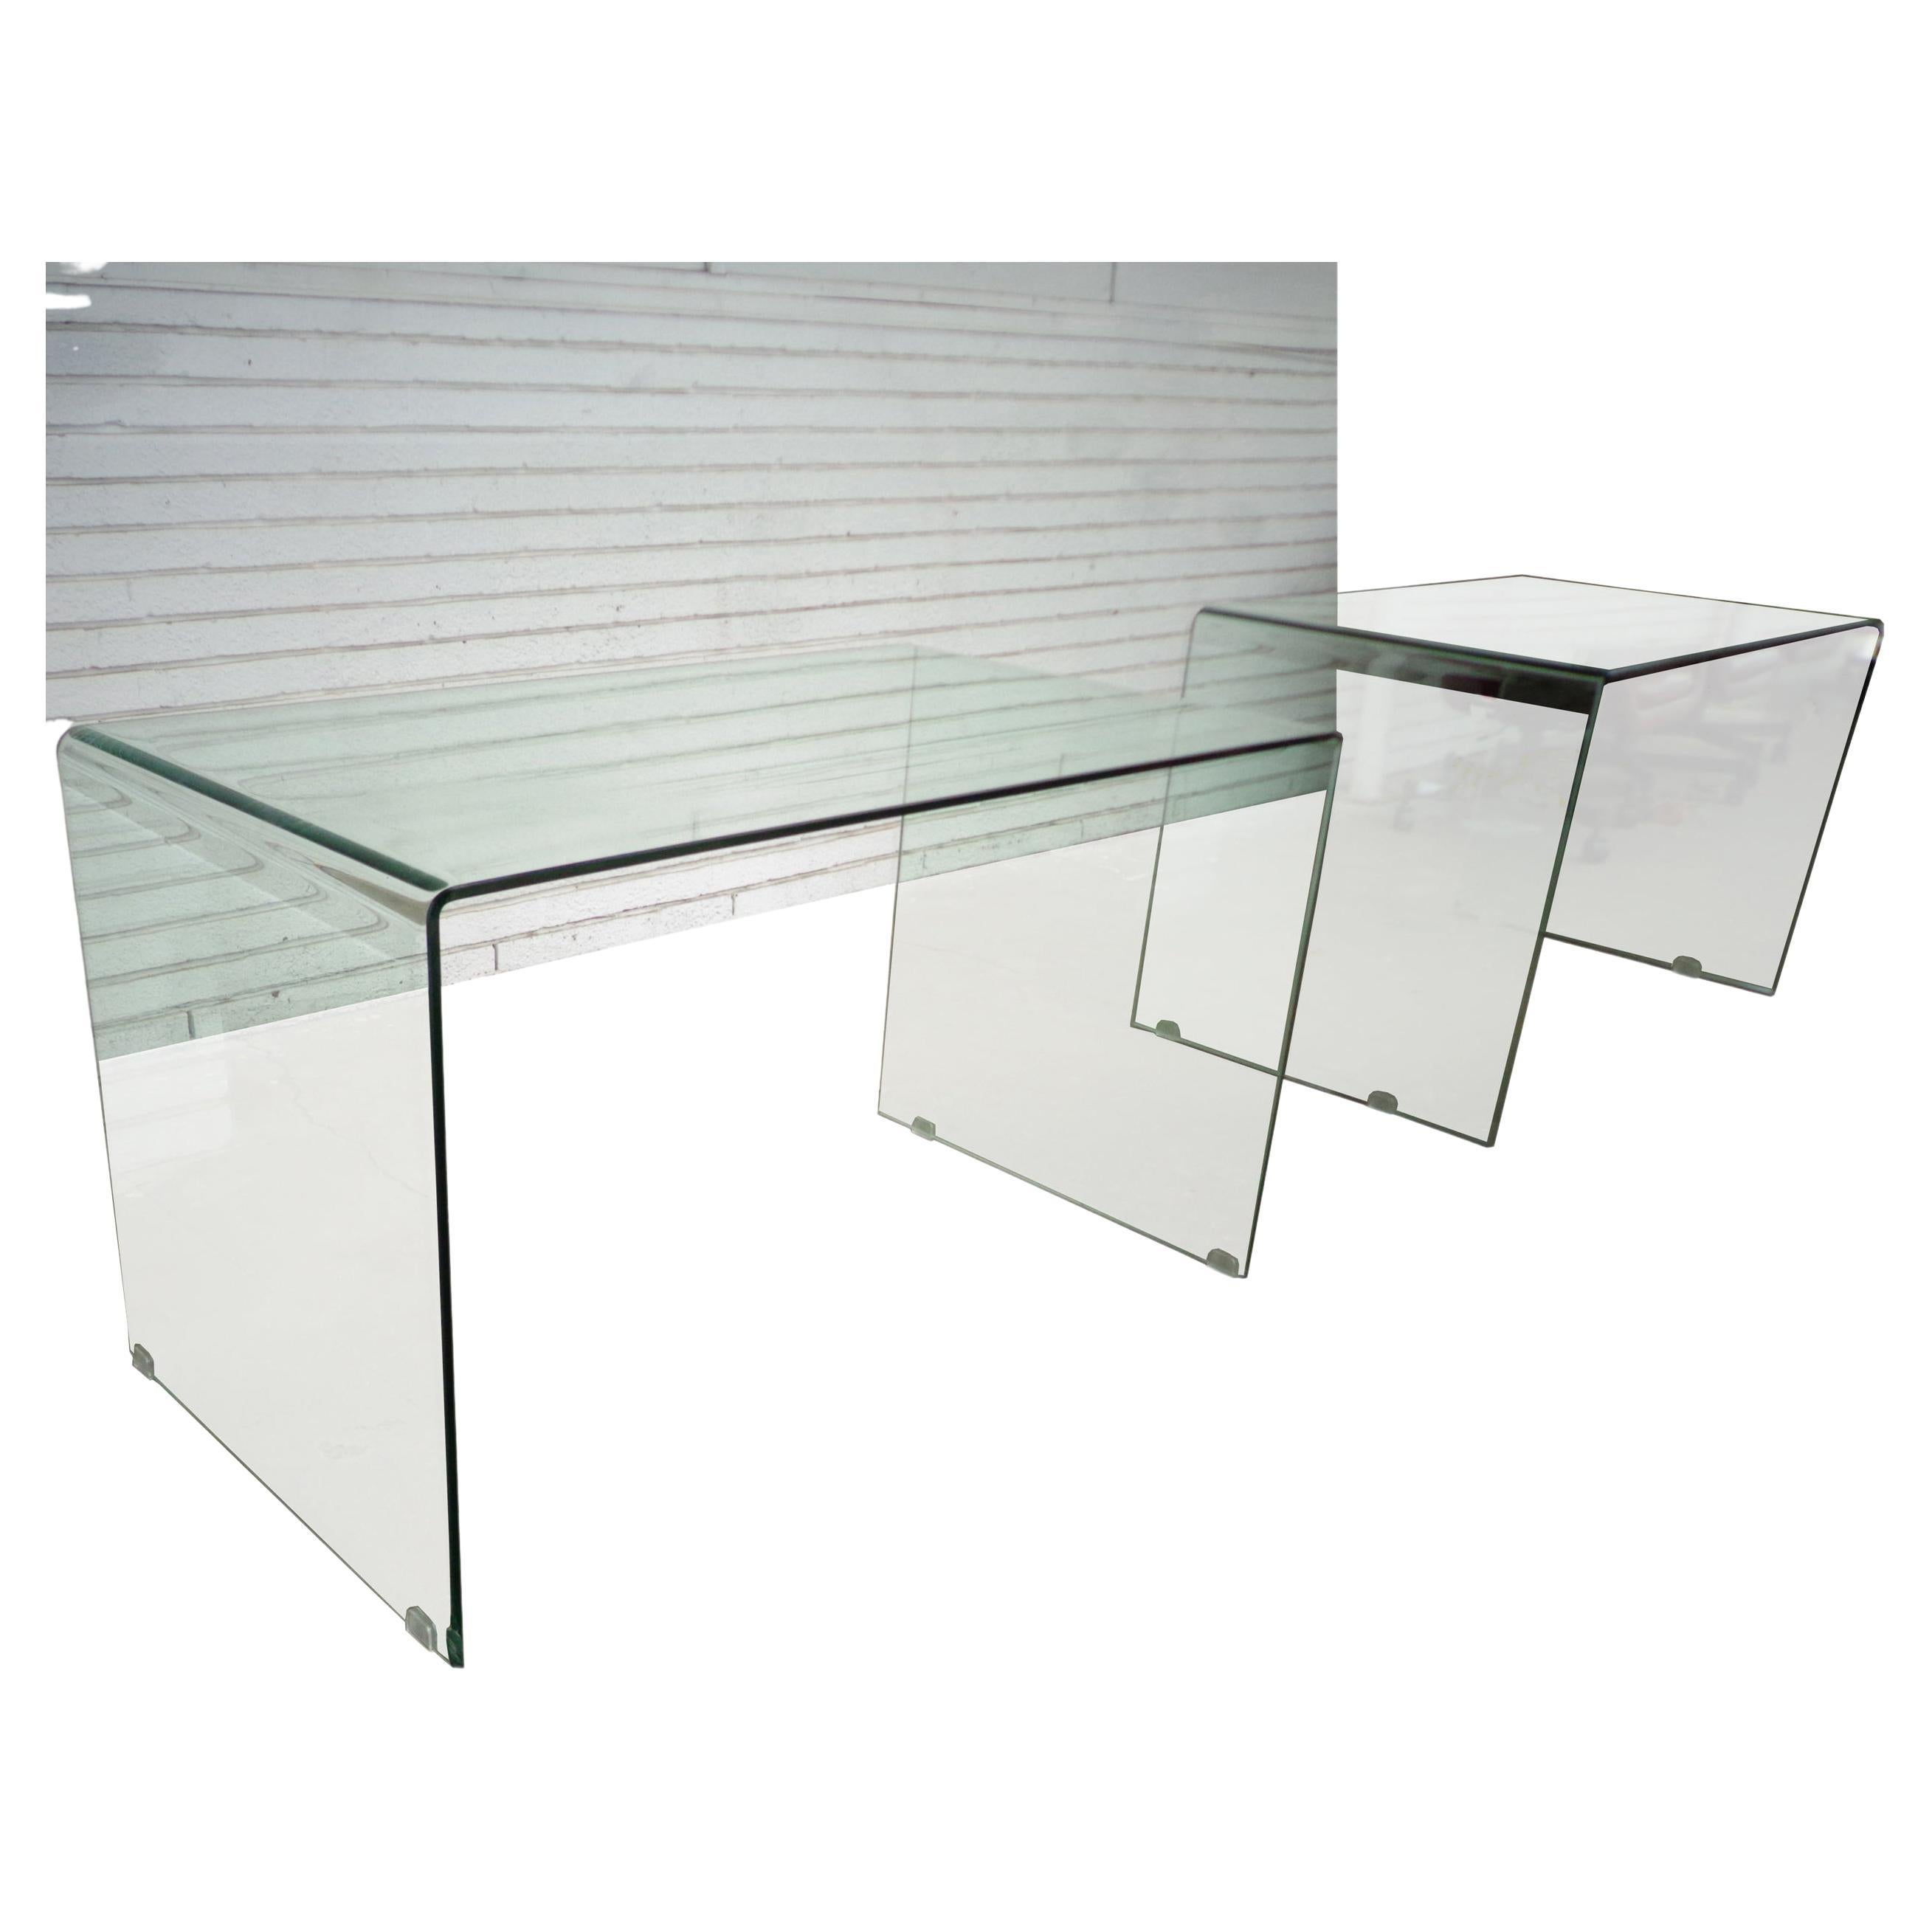 49? waterfall glass desk or console

Pace style modern and minimalist glass waterfall desk or console table. We have 2 available that would work perfectly in a shared office space.
 